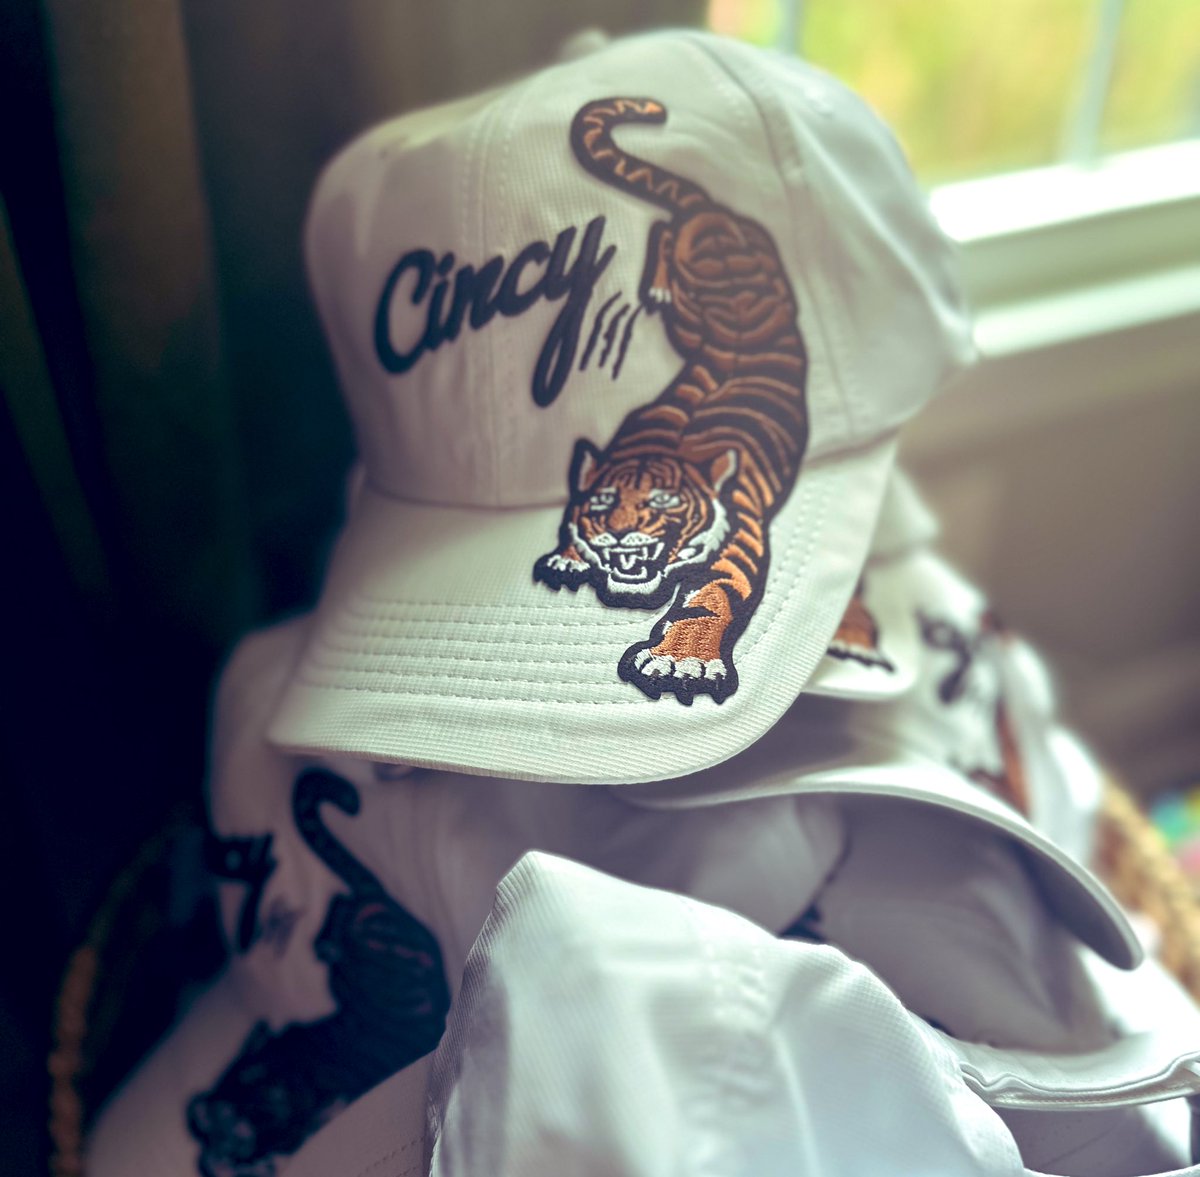 SCHEDULE RELEASE GIVEAWAY Who are the Bengals going to play Week 1? Guess the correct team in the comments and you’ll be entered to win one of these limited edition Tiger Patch Cincy Hats! (On sale soon 😎)